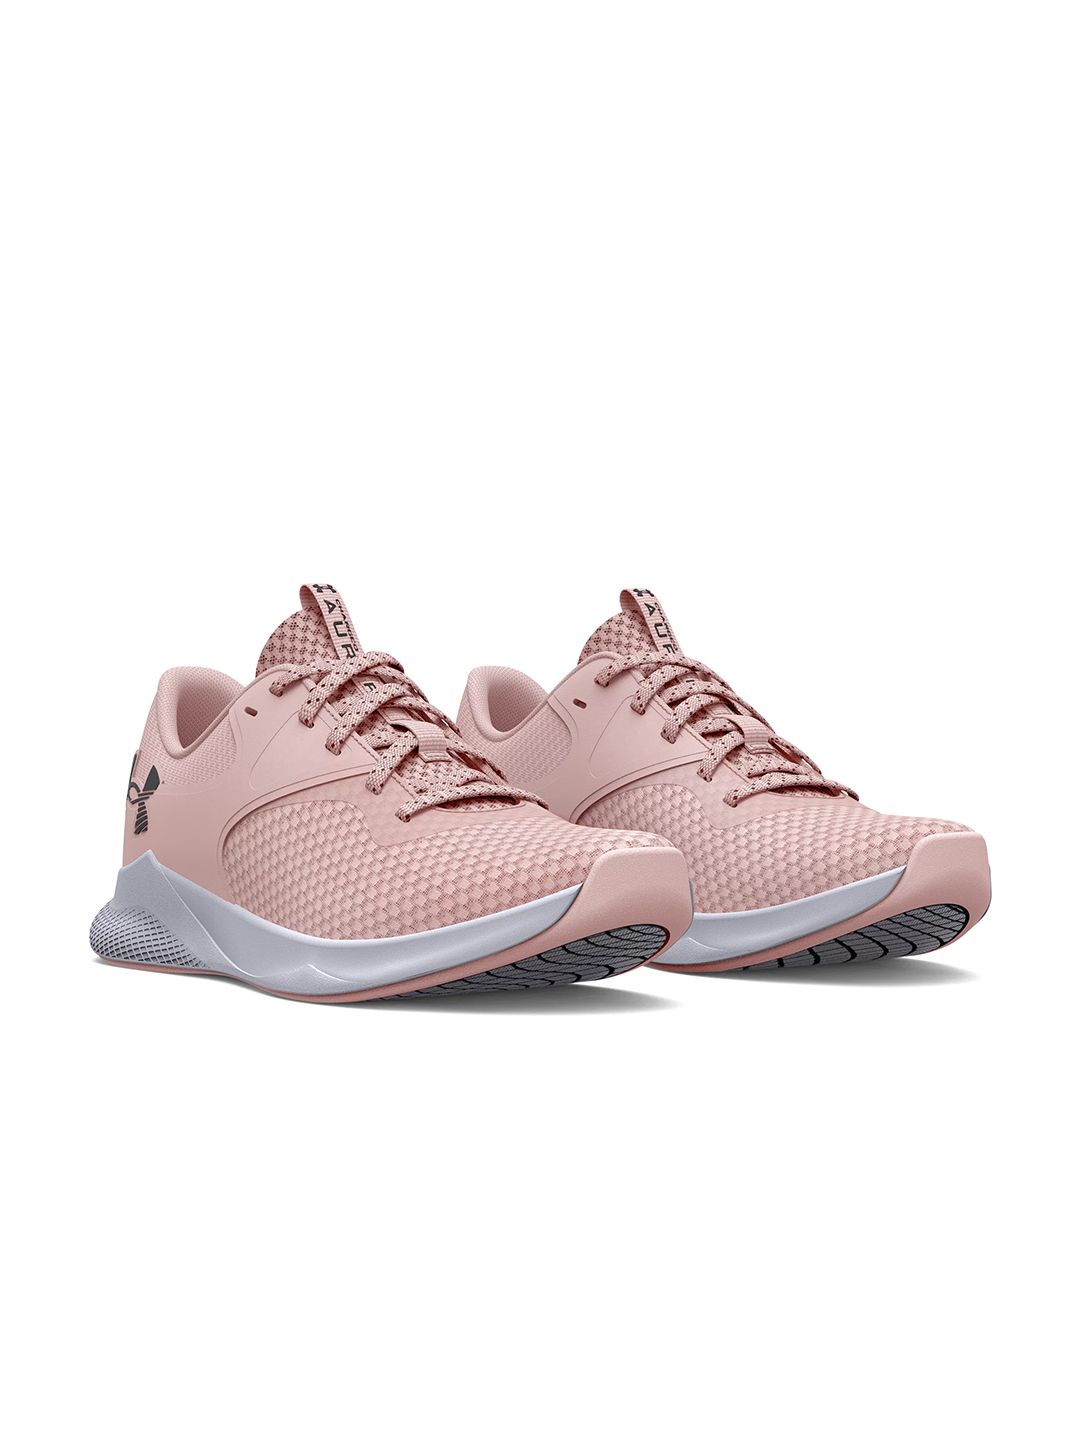 UNDER ARMOUR Women Pink Charged Aurora 2 Training Shoes Price in India